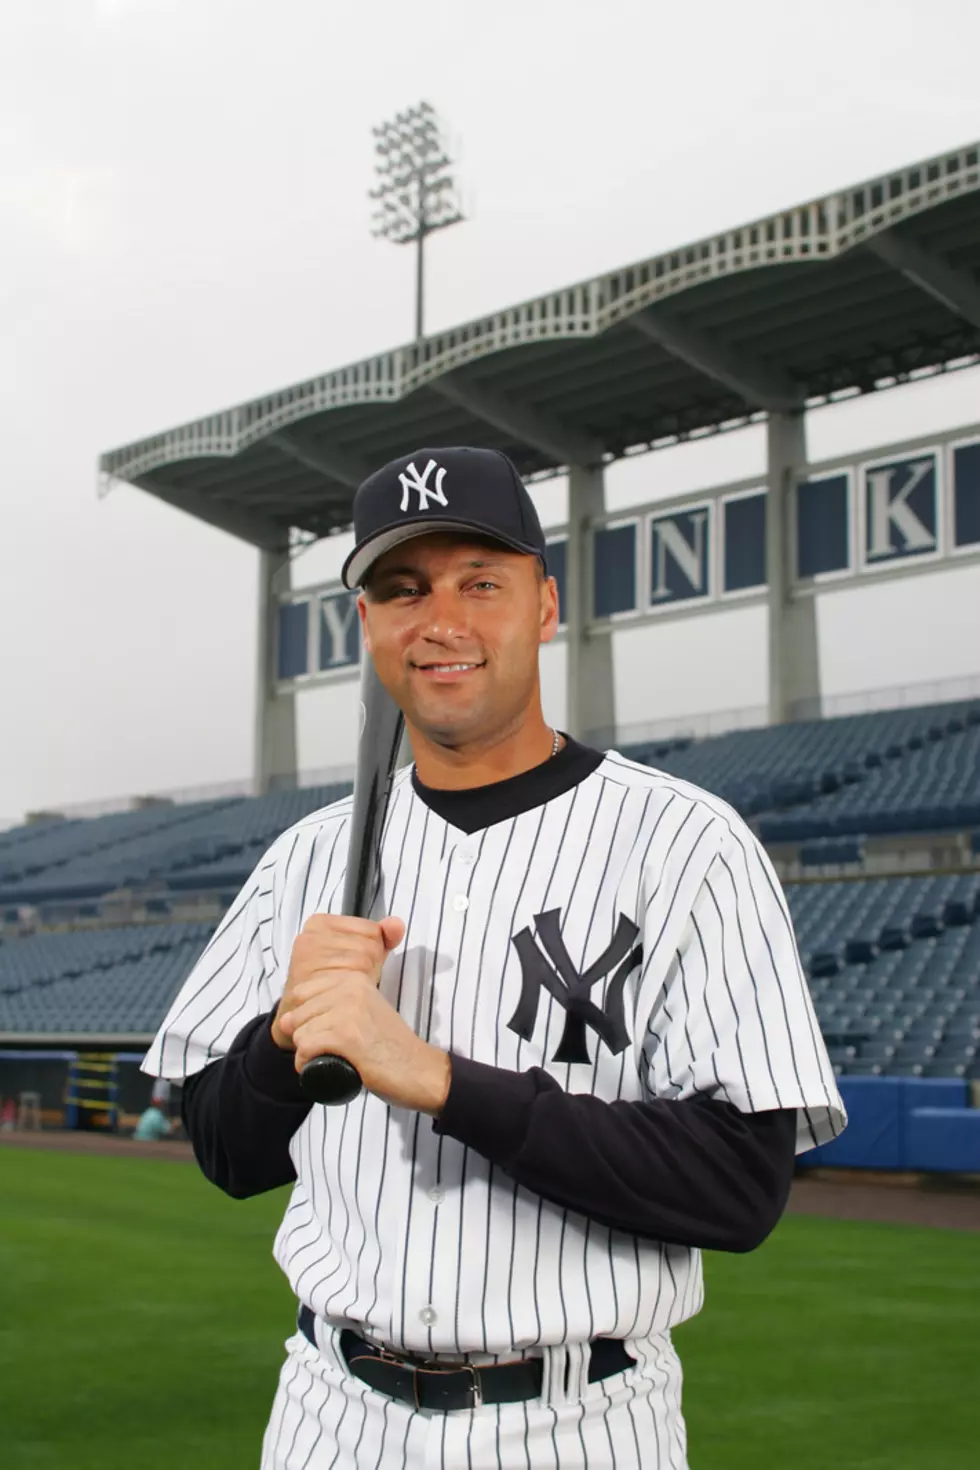 Jeter Elected To Baseball Hall of Fame